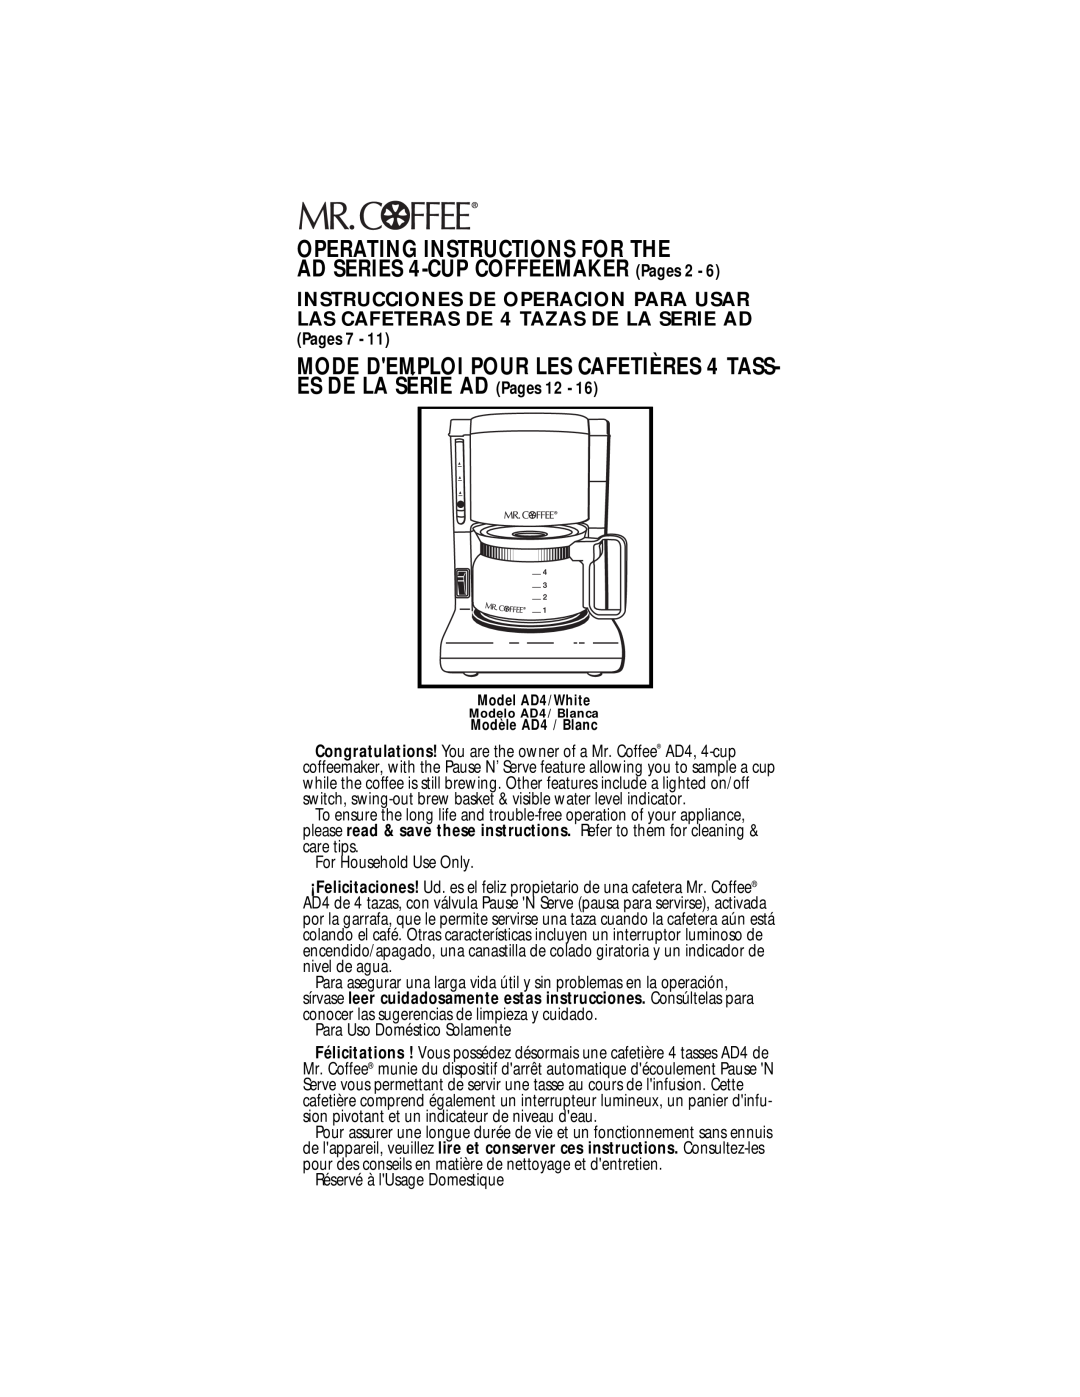 Mr. Coffee operating instructions Operating Instructions For The, AD SERIES 4-CUPCOFFEEMAKER Pages, Model AD4/White 